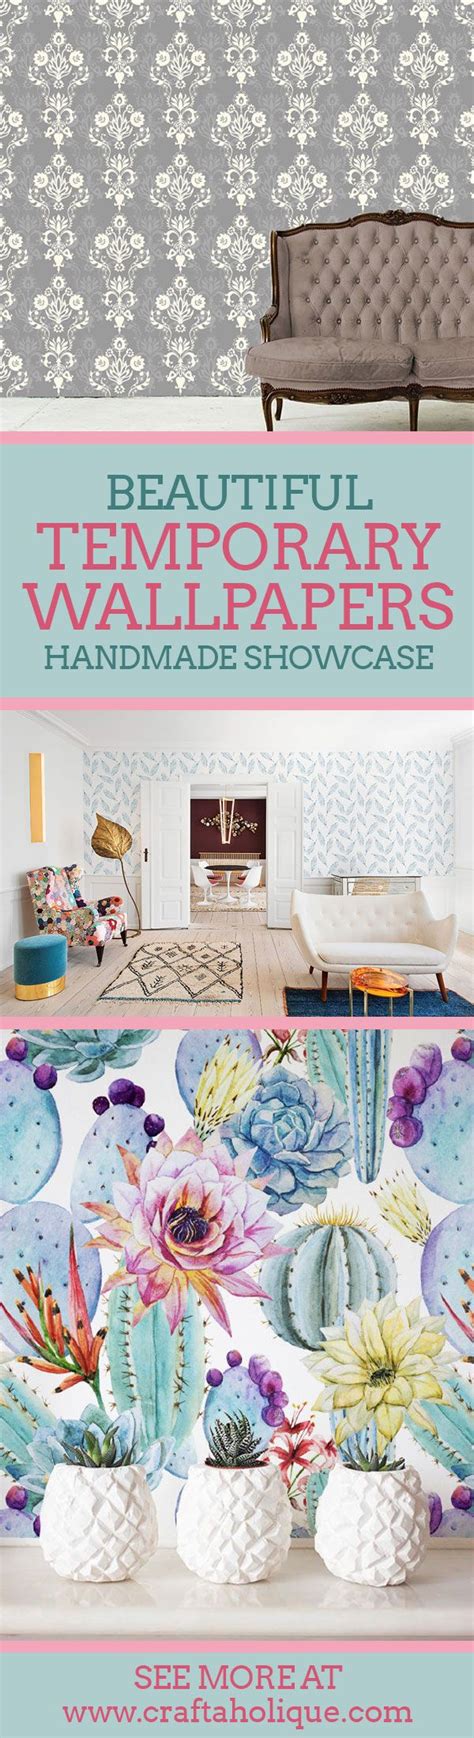 Handmade Showcase Temporary Removable Wallpapers Renters